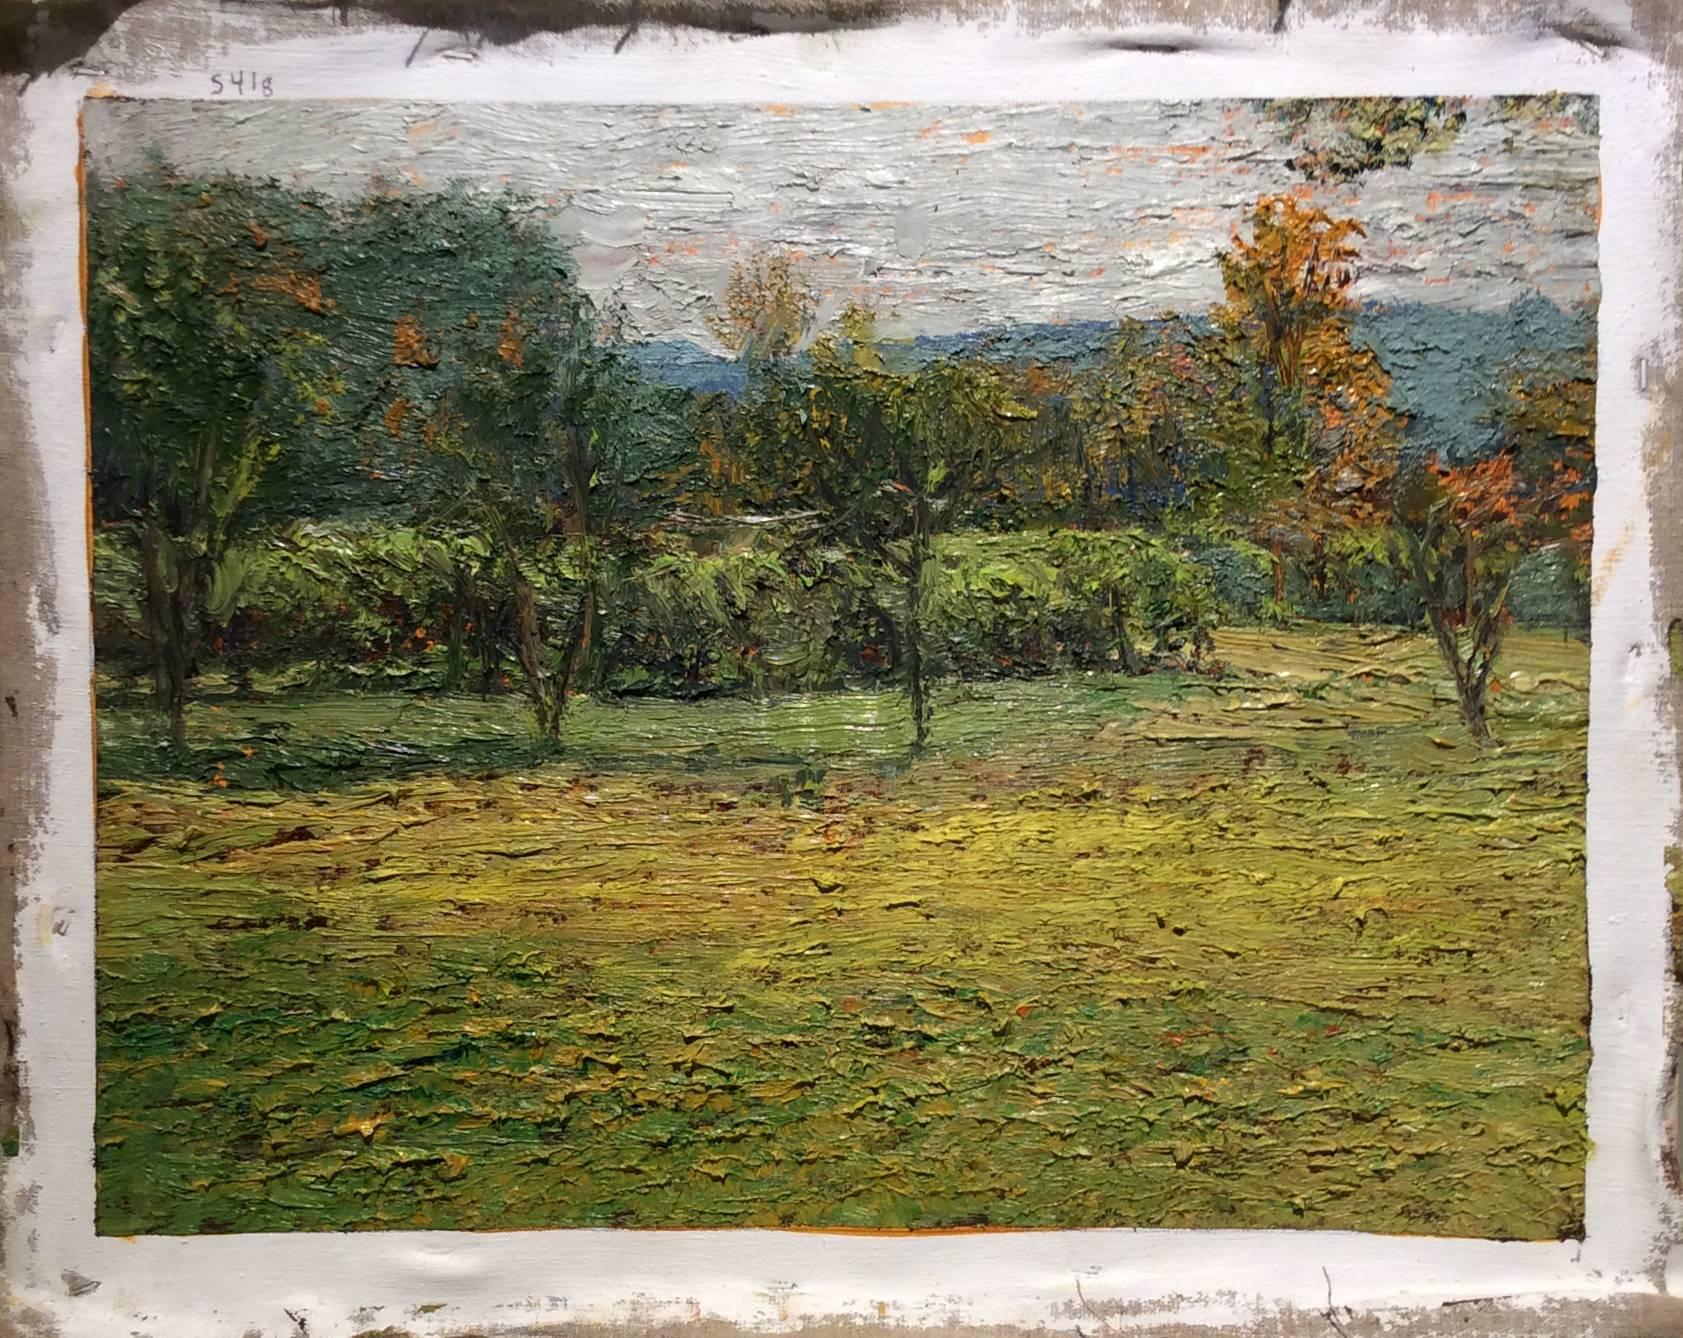 #5418 Washington County Vineyard (Impressionistic Green Country Landscape) - Painting by Harry Orlyk